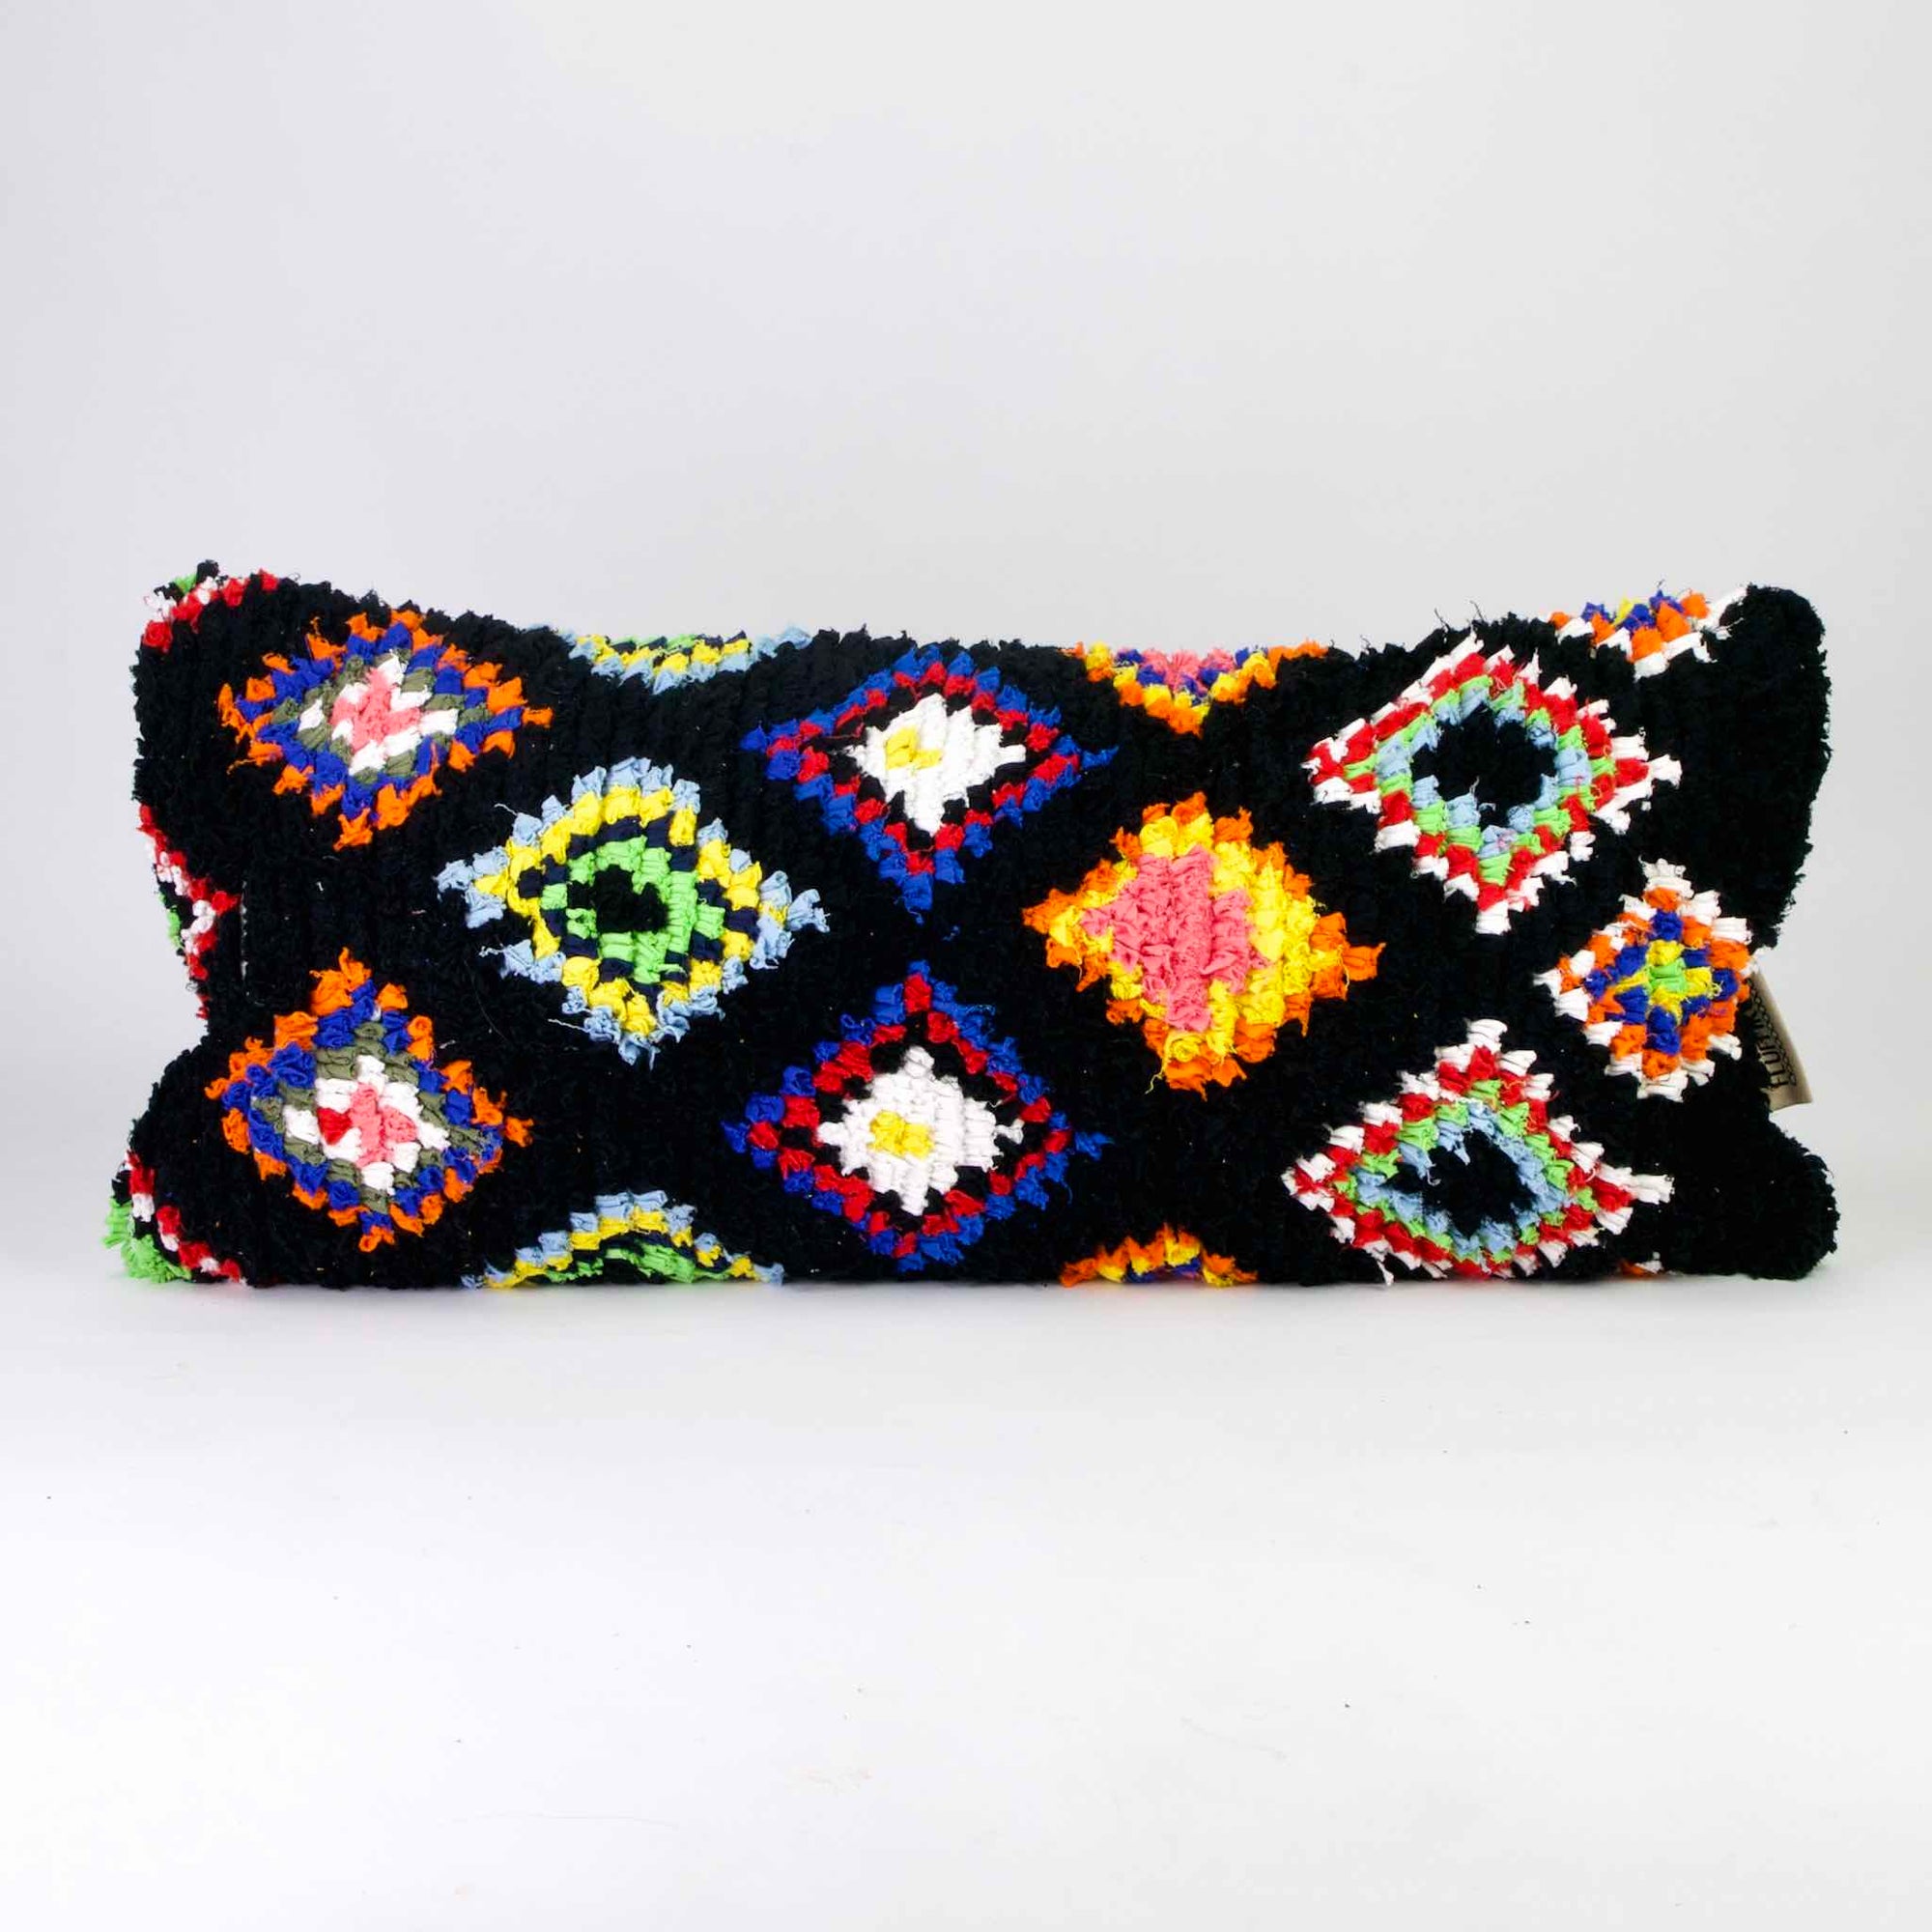 Black Fluffikon Boucherouite lumbar pillow. The Moroccan pillow is made from upcycled clothes. It has colorful patterns in yellow, red, blue and green.